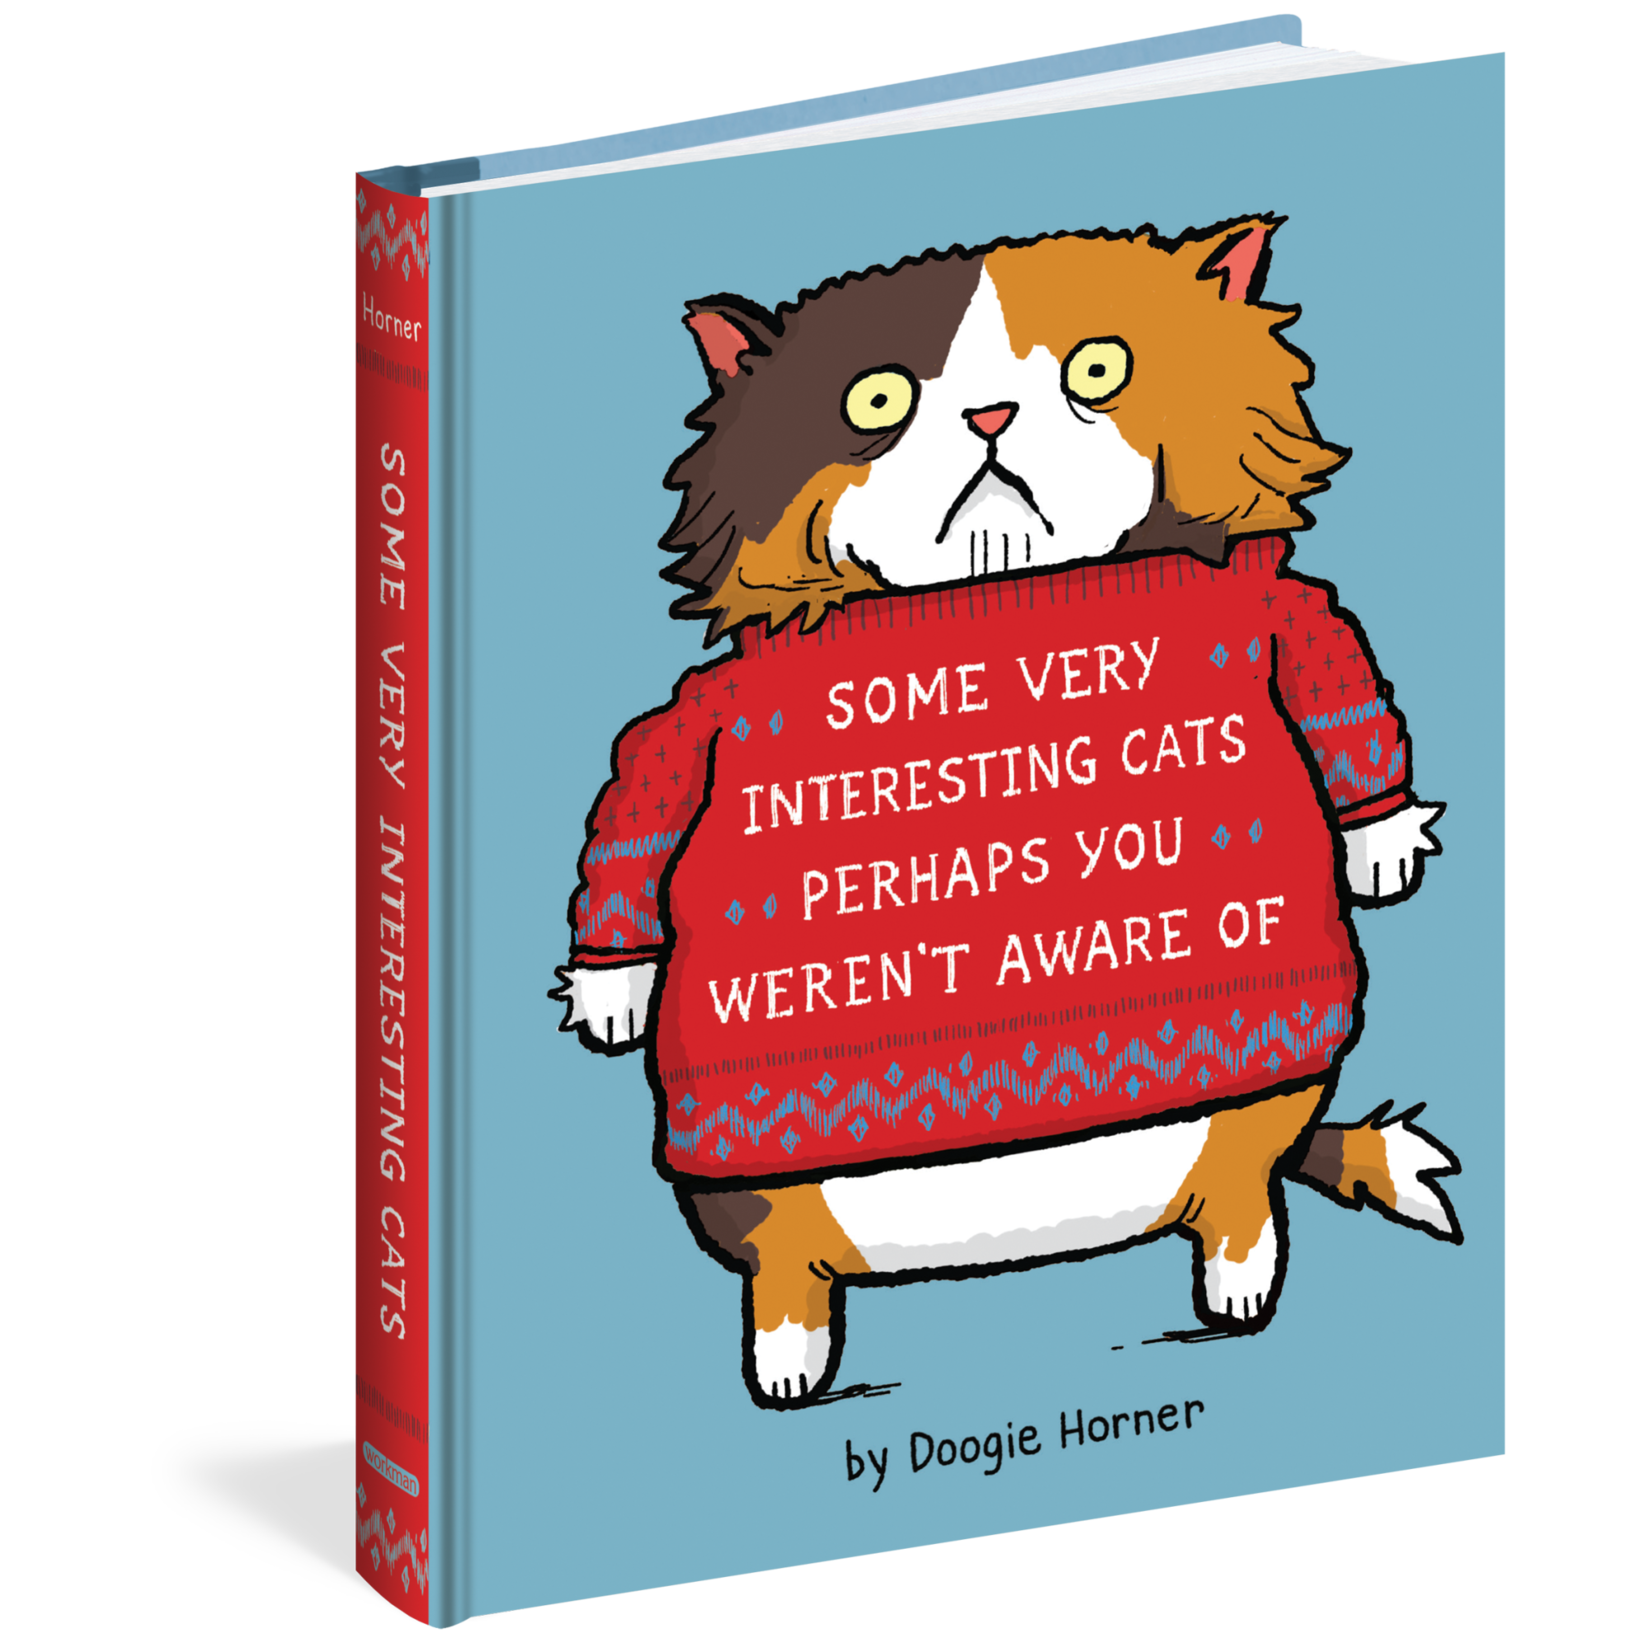 Book - Some Very Interesting Cats Perhaps You Weren’t Aware Of